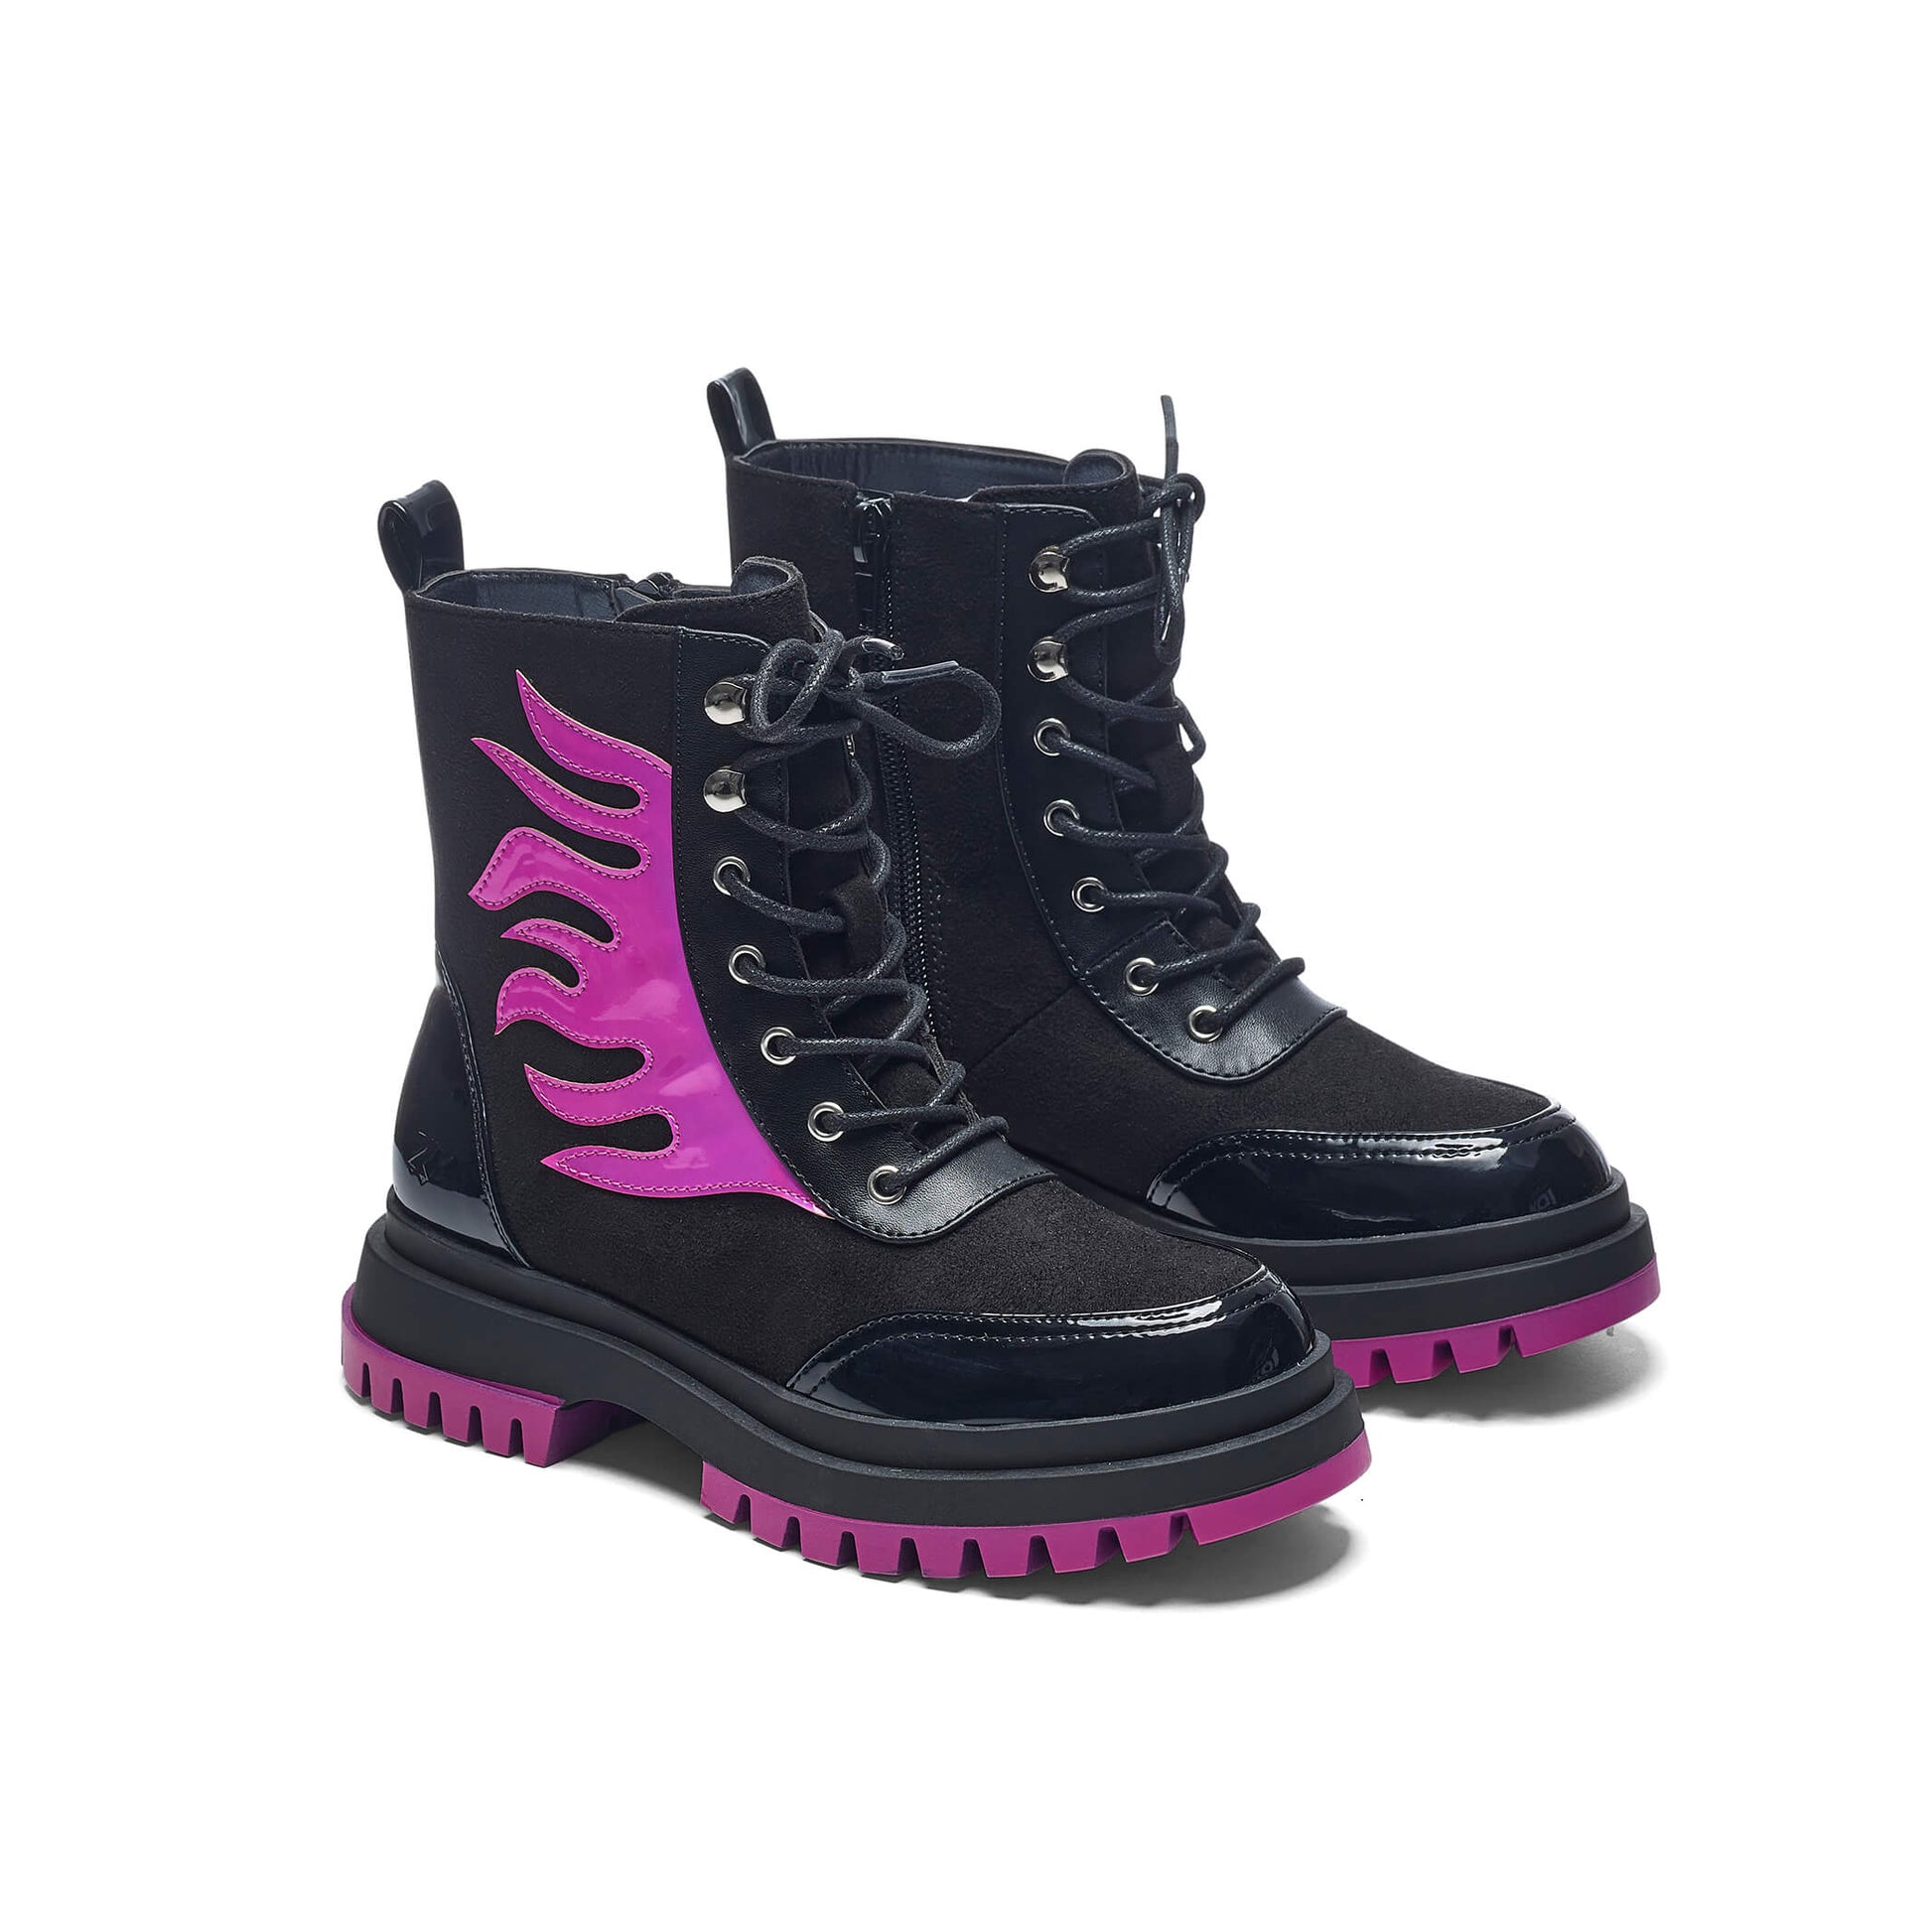 Lil’ Helios Purple Flame Boots - Ankle Boots - KOI Footwear - Black - Three-Quarter View